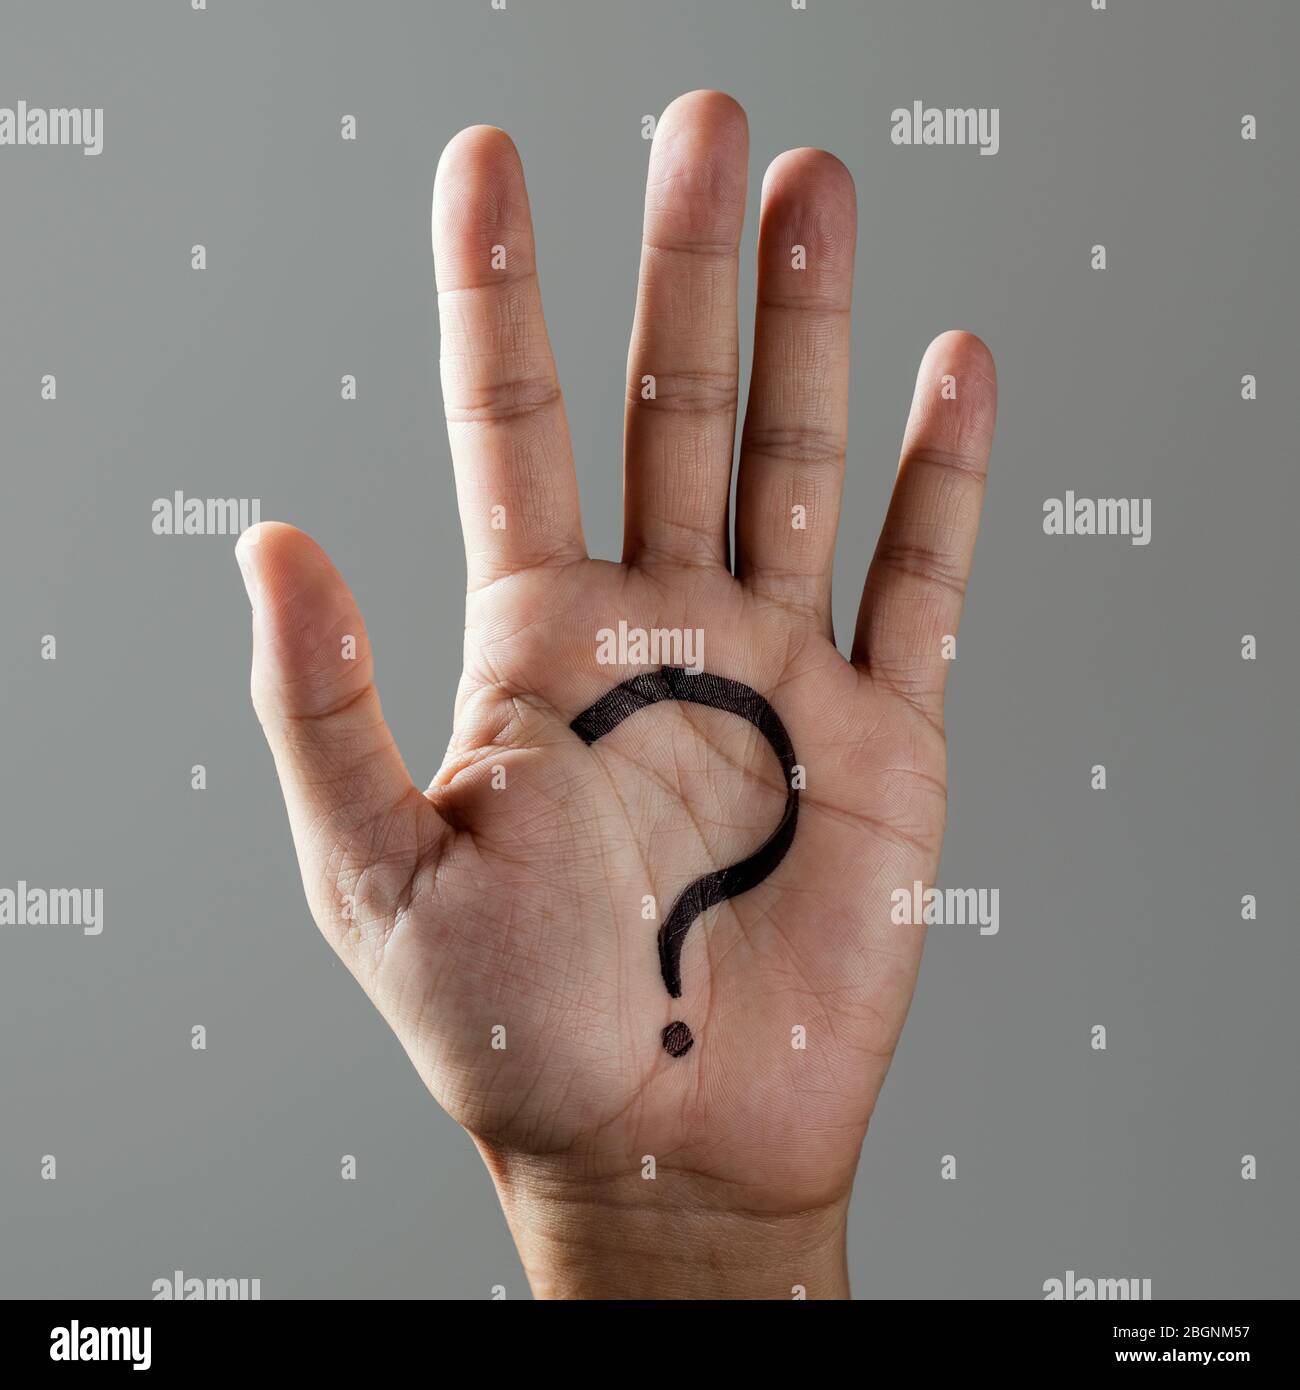 closeup of the hand of a man with a question mark painted in his palm, on a gray background Stock Photo